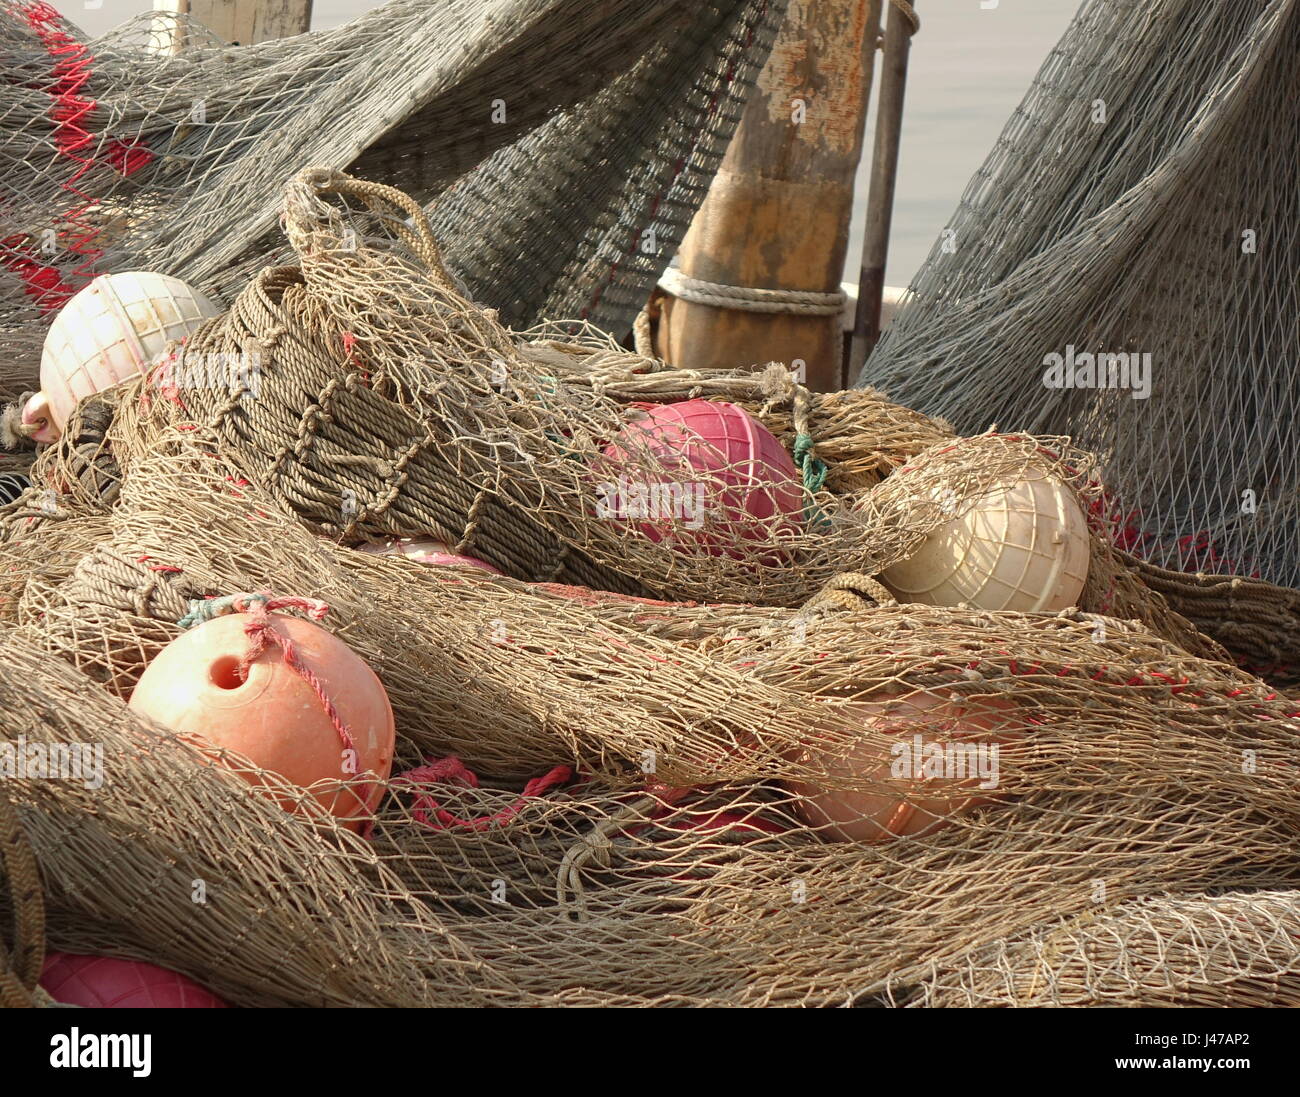 https://c8.alamy.com/comp/J47AP2/a-pile-of-old-fishing-nets-with-hollow-round-plastic-floats-J47AP2.jpg